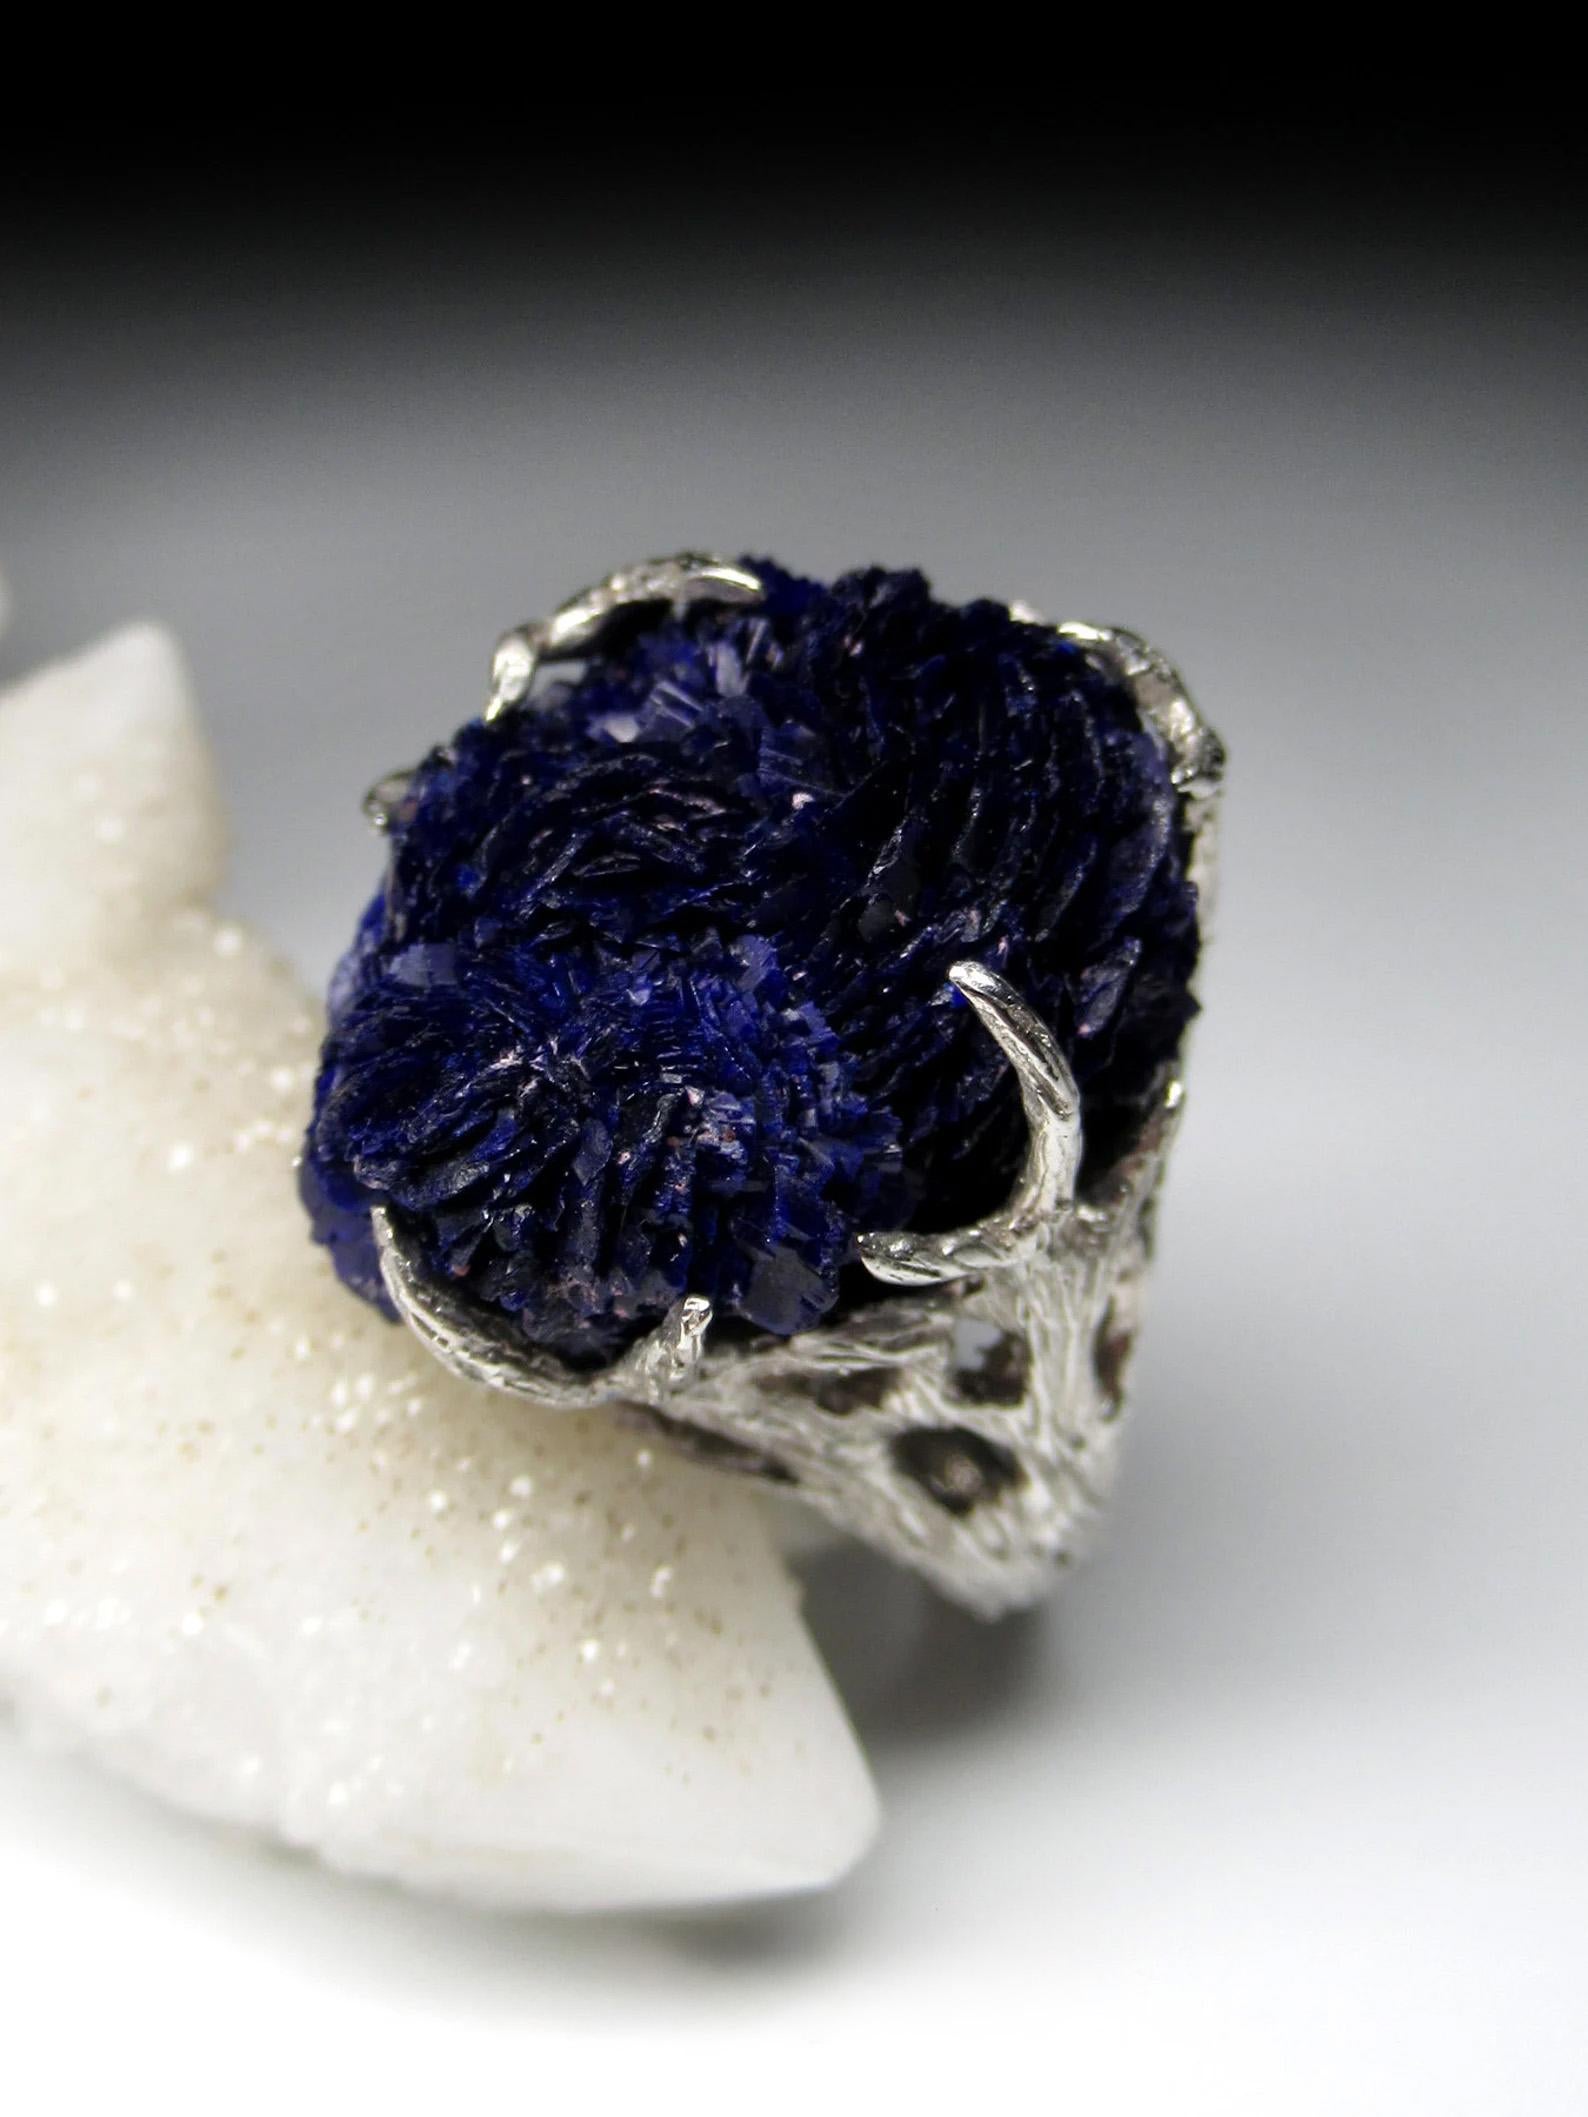 Artisan Azurite Silver Ring Amazing Rare Natural Blue Raw Azurite Crystals Gemstone  For Sale